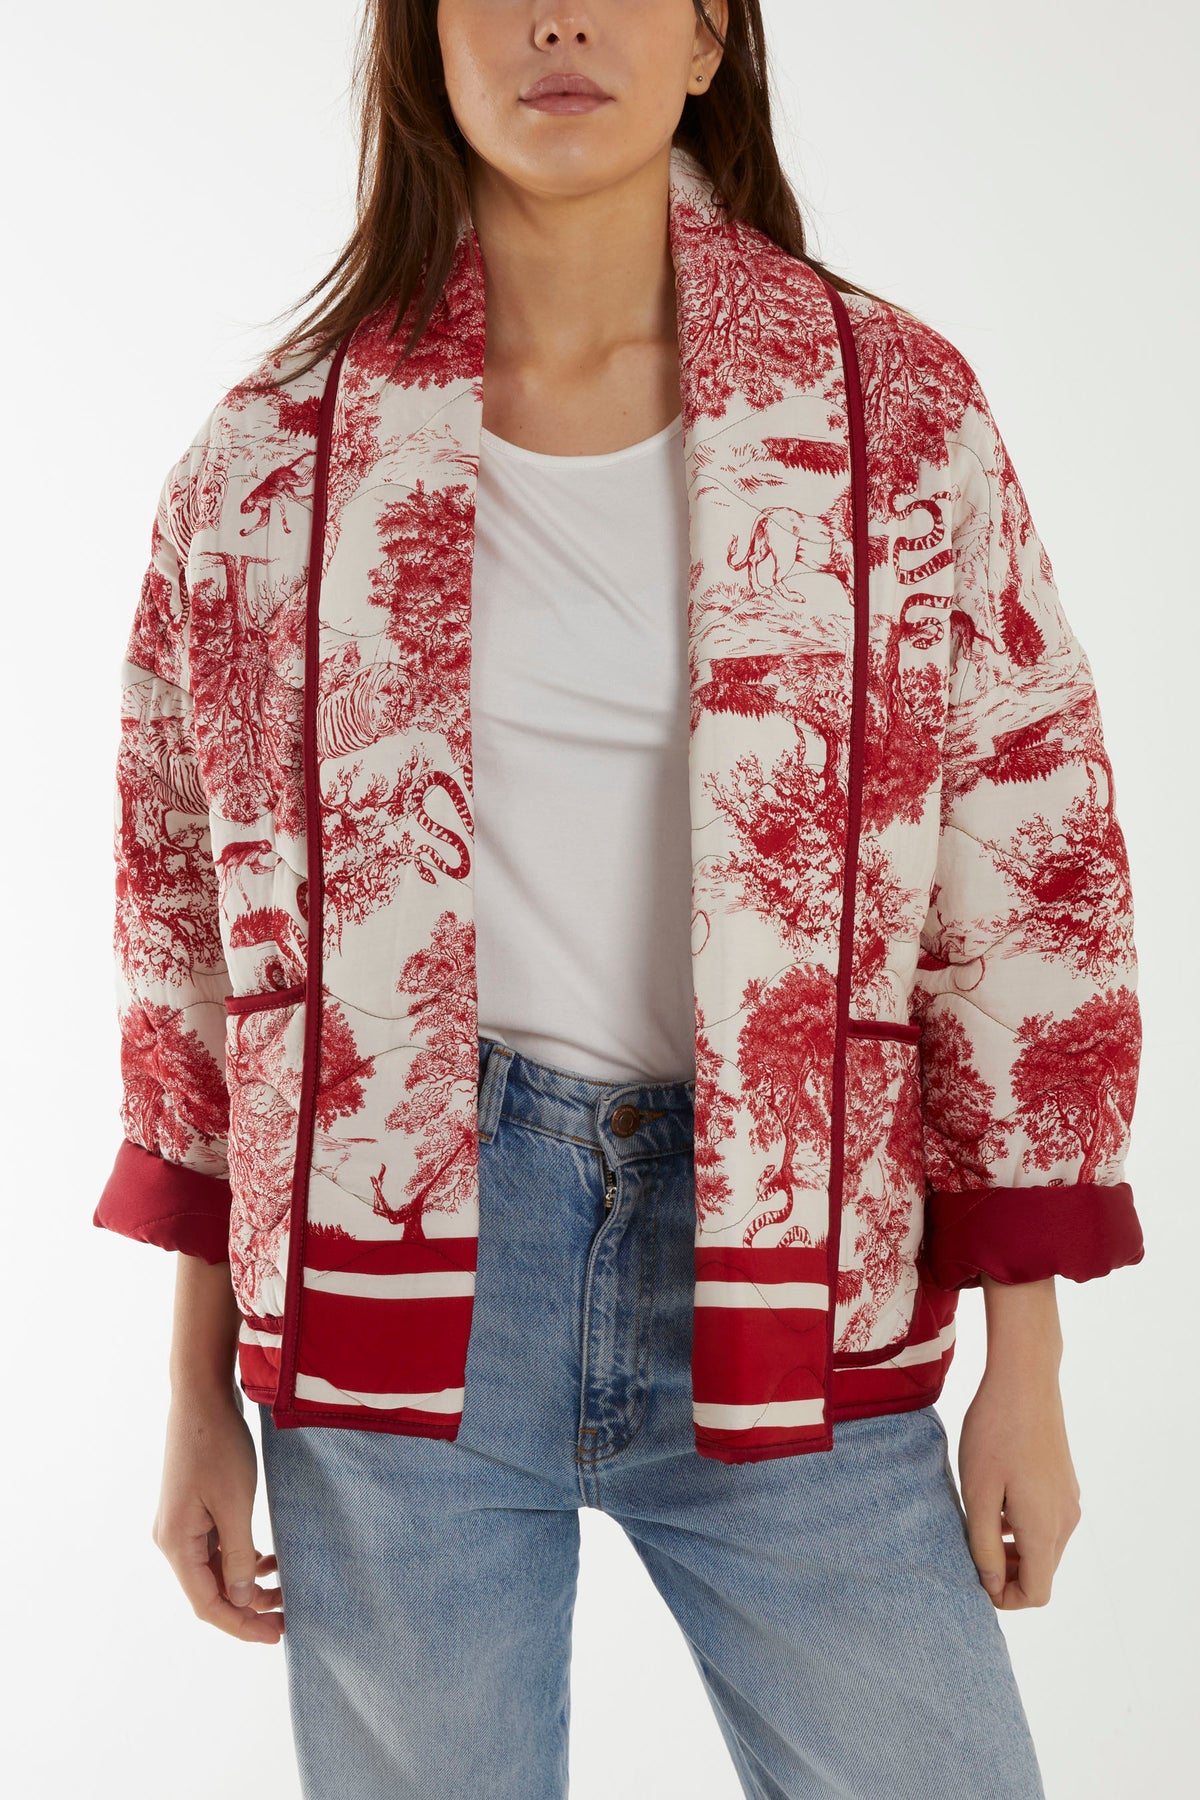 Toile Du Jouy Quilted Jacket